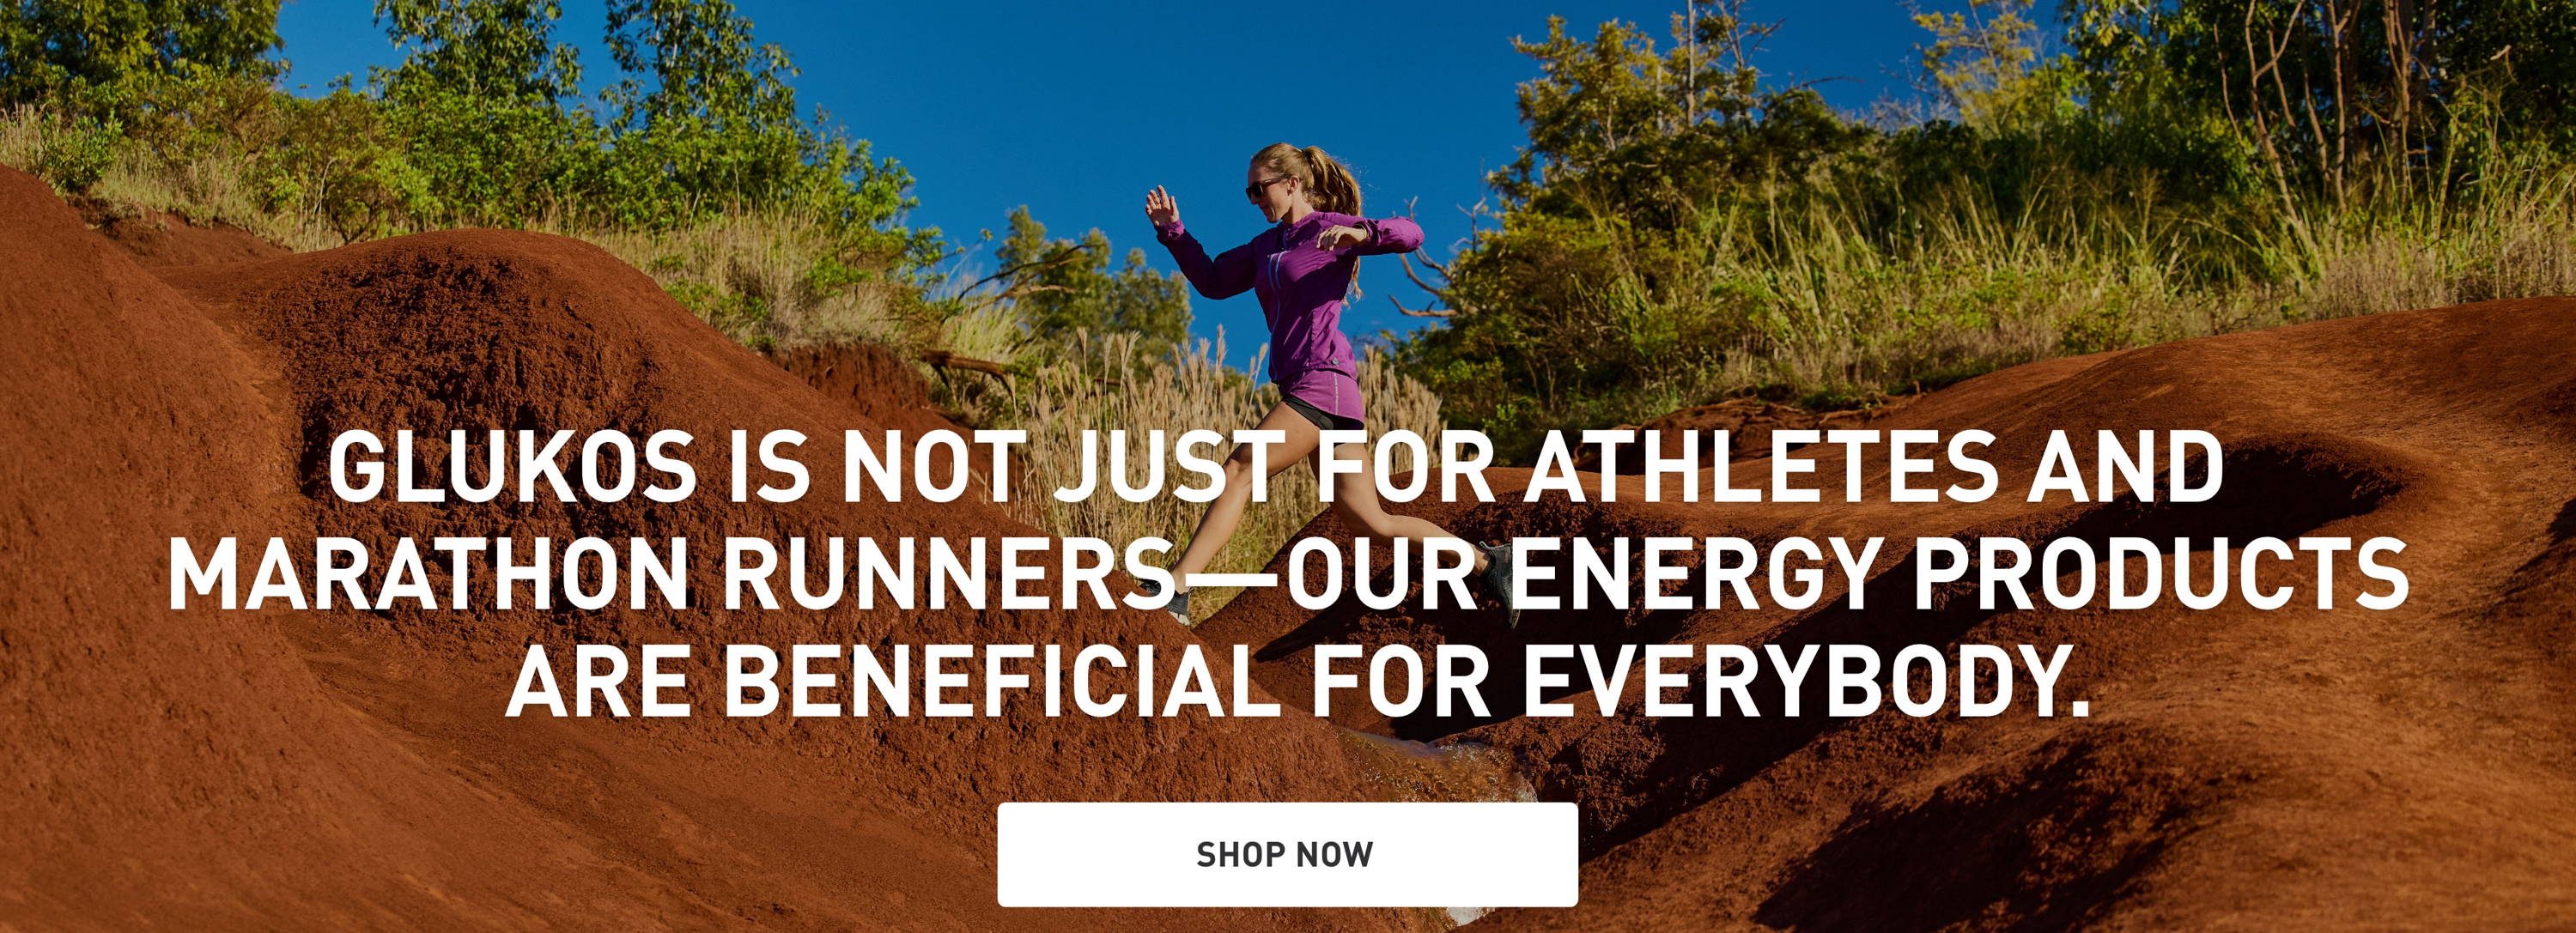 Glukos is not just for athletes and marathon runners - our energy products are beneficial for everybody. SHOP NOW